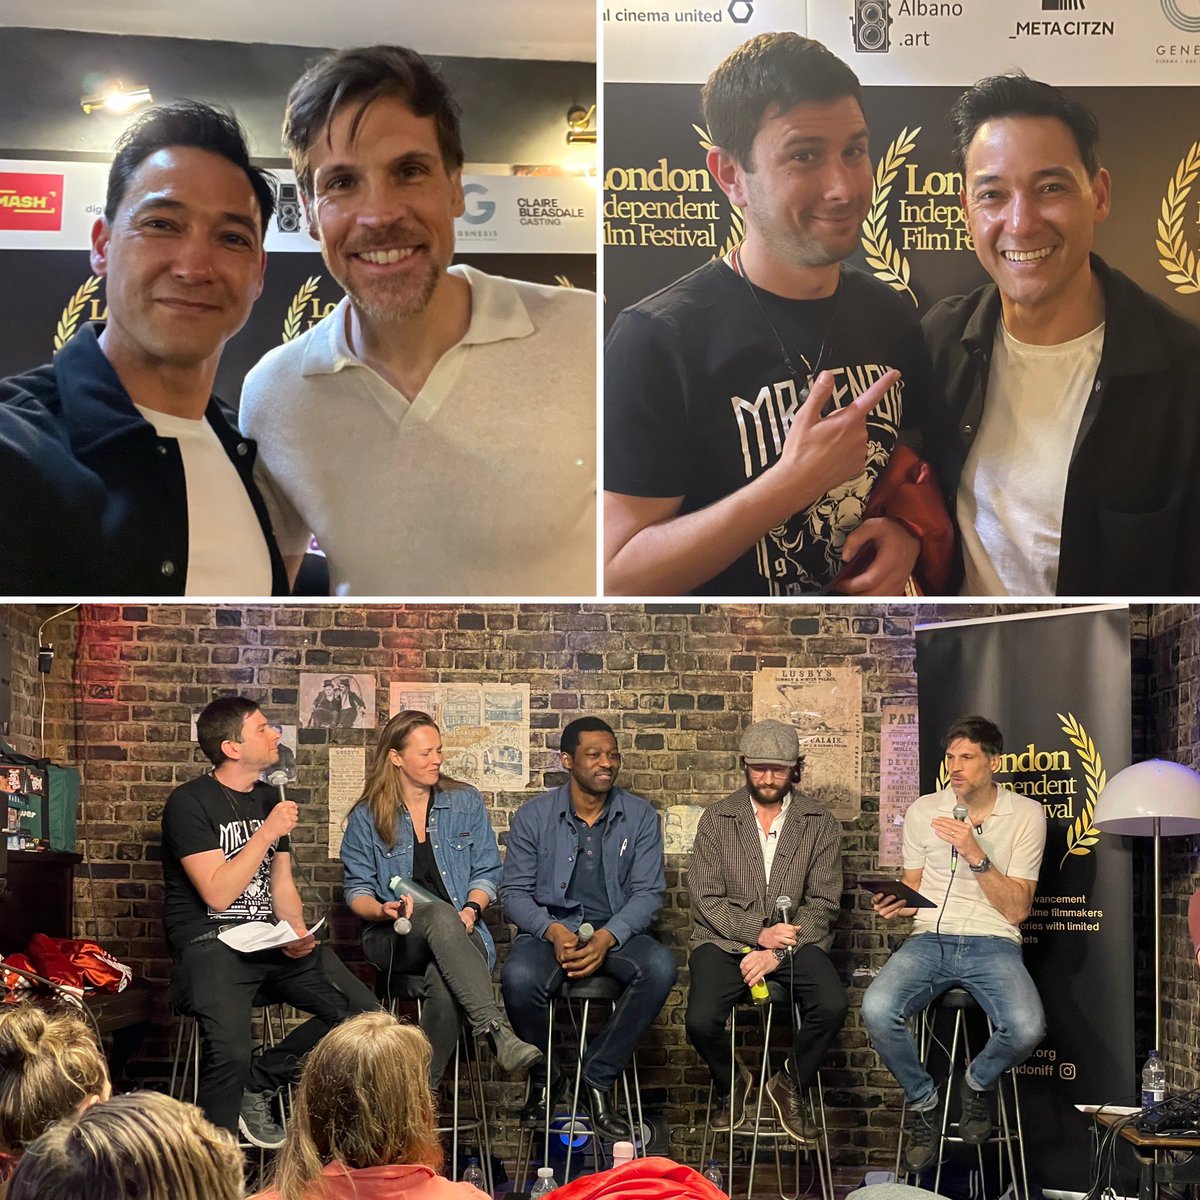 Awesome panel discussion for @filmmakerspod at @LondonIFF Feels like an age since I last hung out and talked film! Massive thanks to @NMarburger @GilesAlderson @DirDomLenoir @CozGreenop @francisannan and Debs Patterson #actor #screenwriter #director #SupportIndieFilm